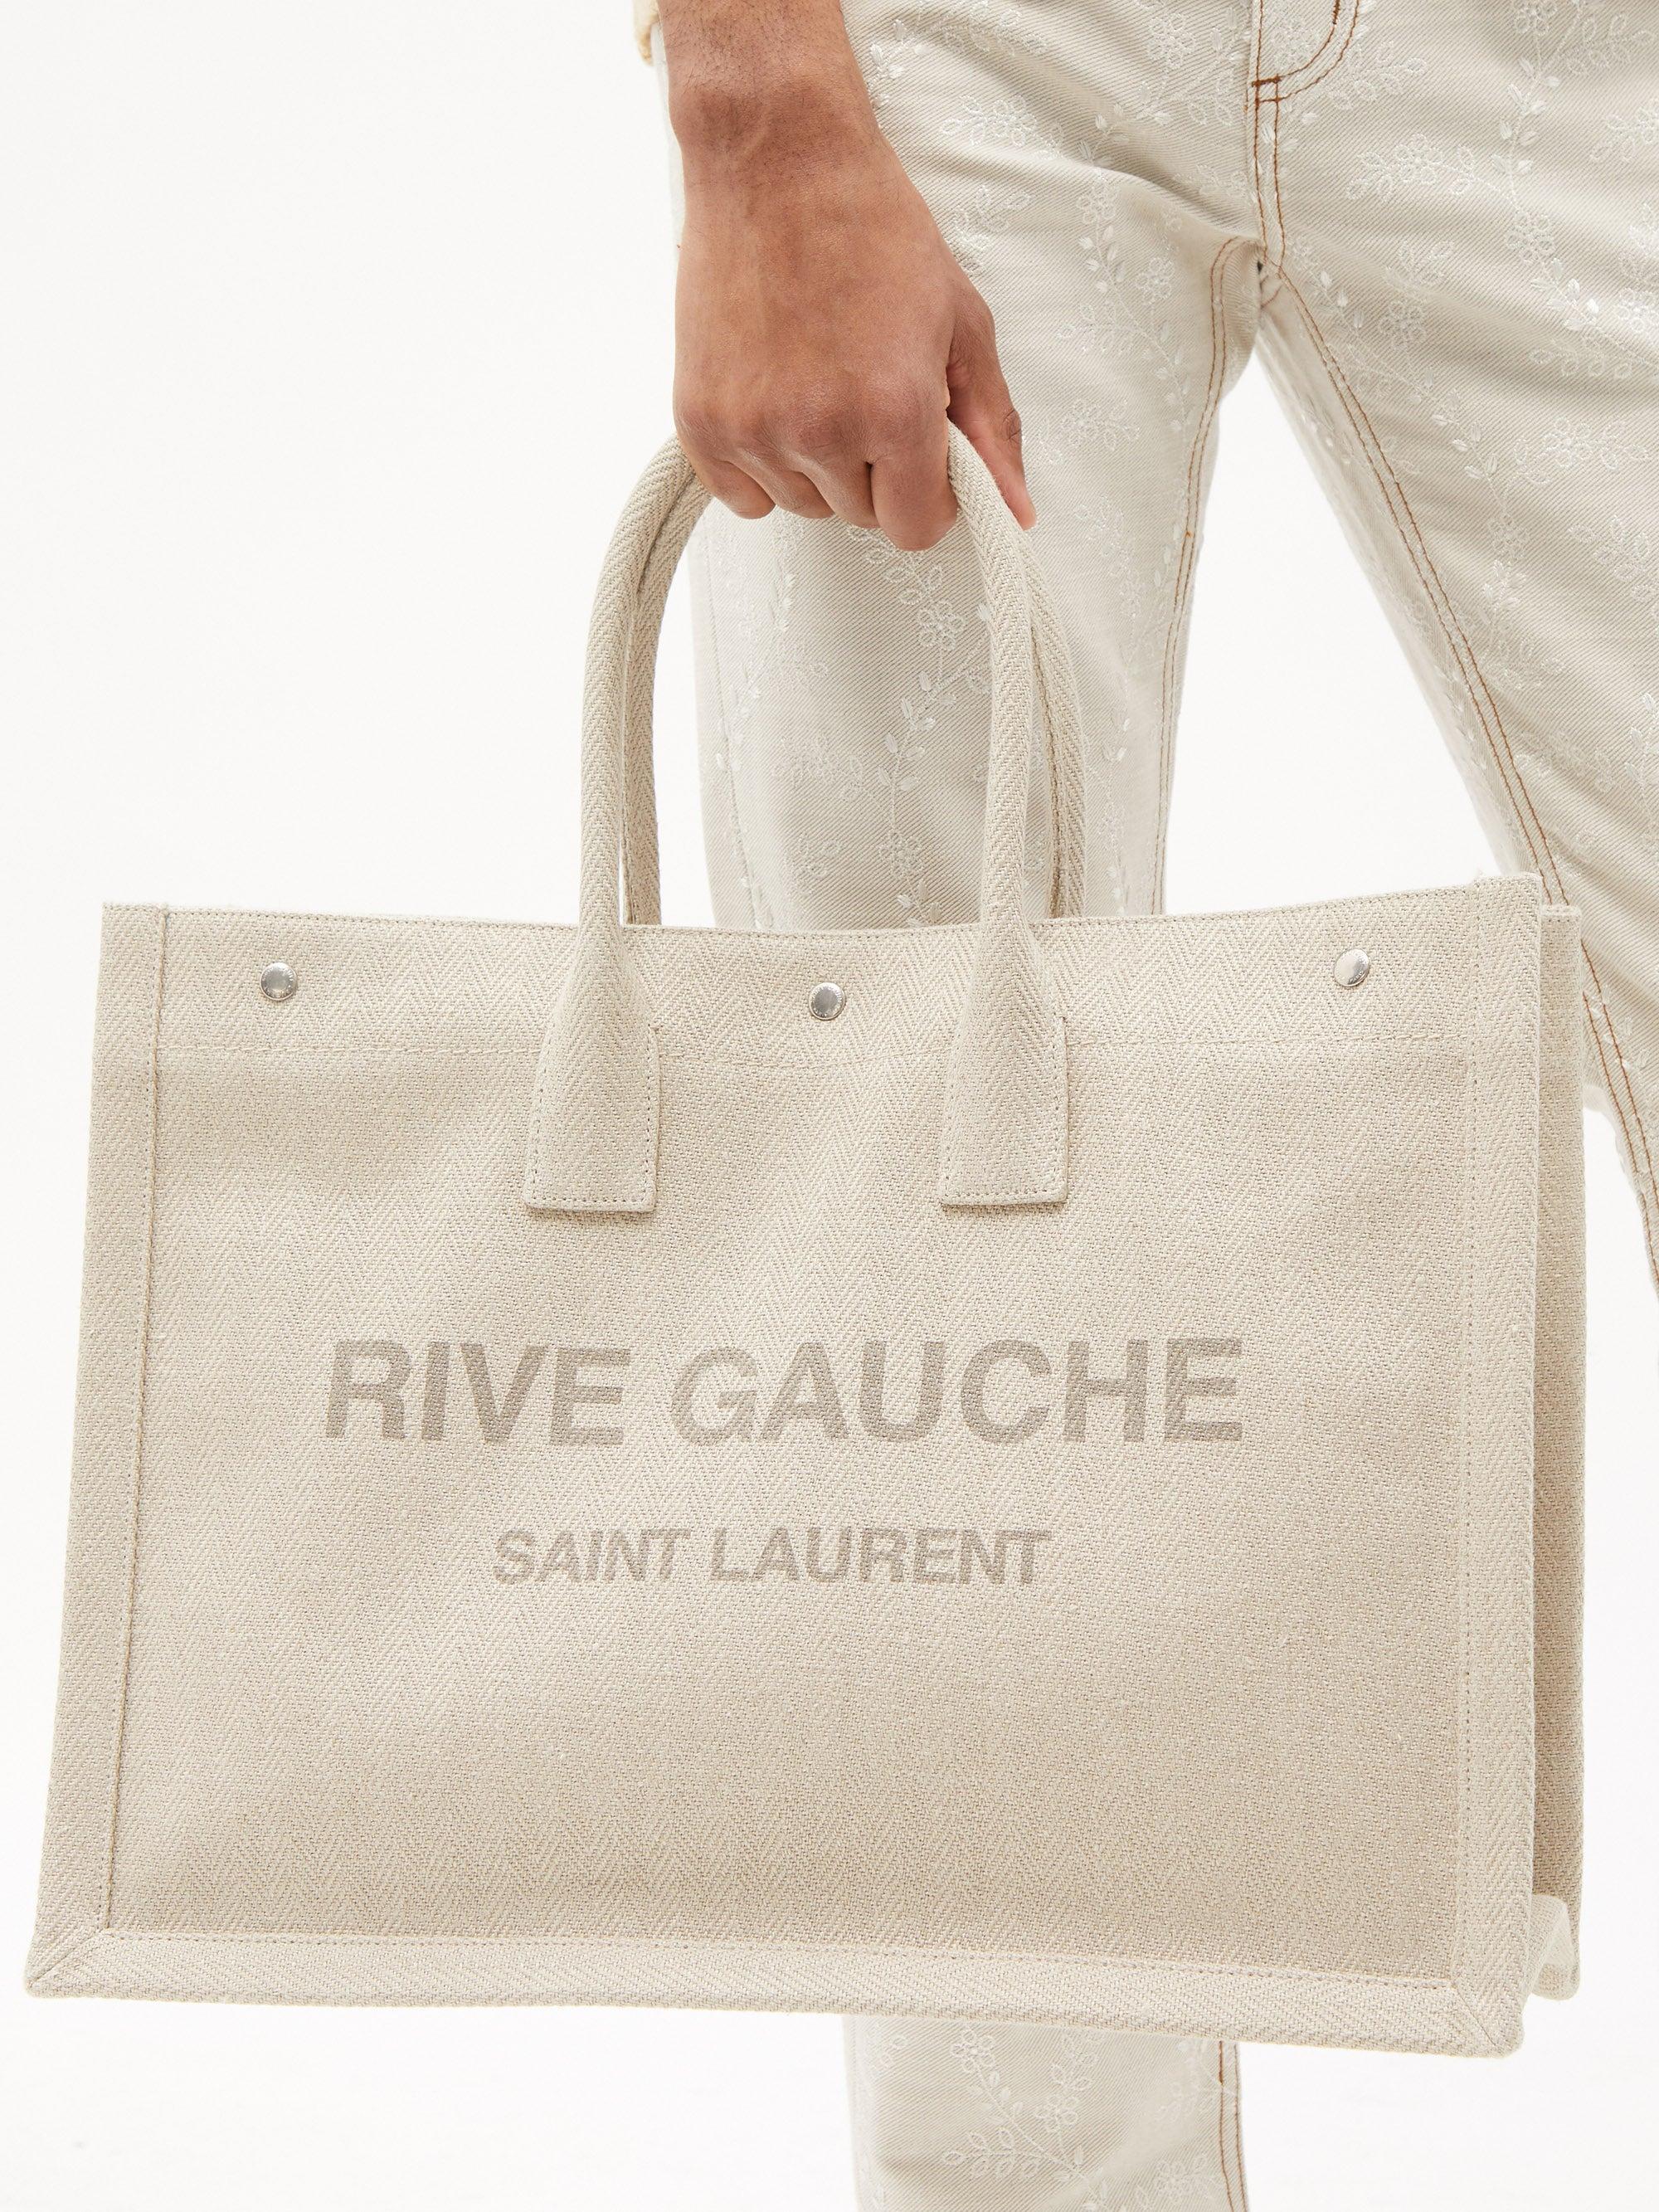 SAINT LAURENT Rive Gauche small leather-trimmed printed canvas